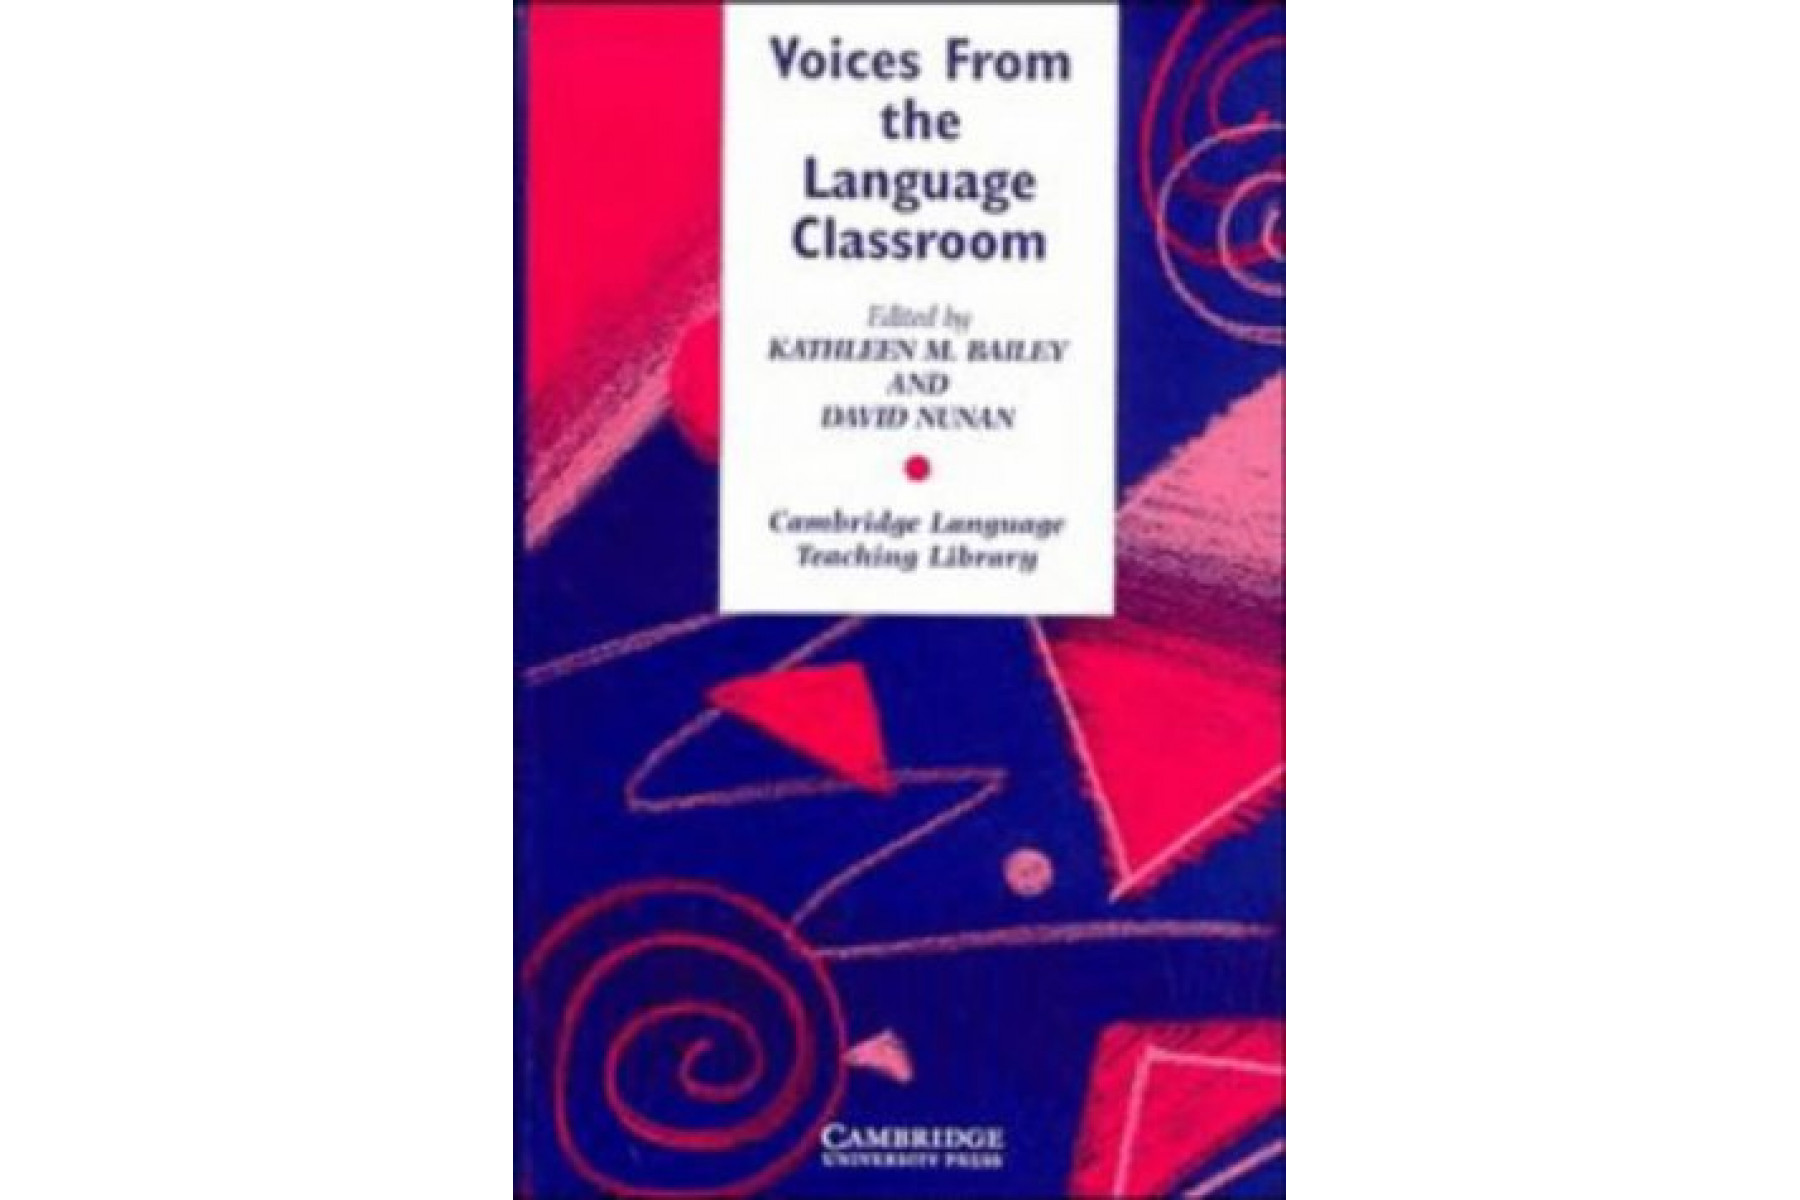 Voices from the Language Classroom